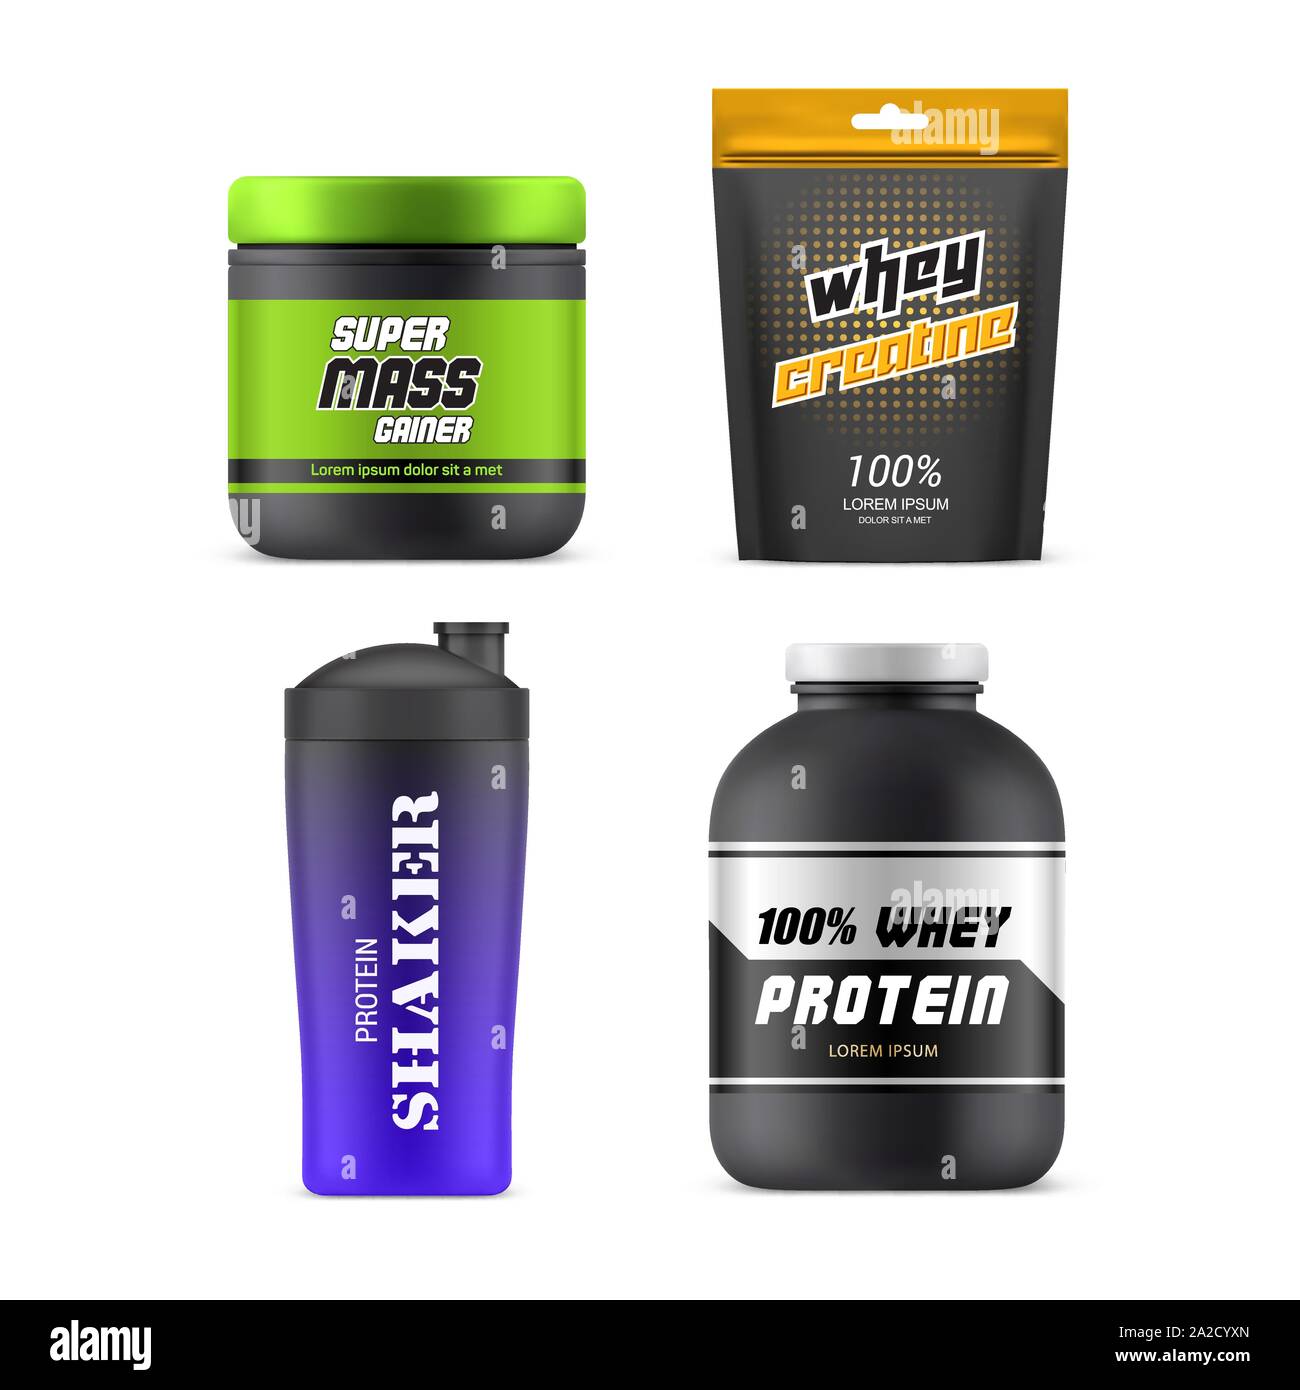 https://c8.alamy.com/comp/2A2CYXN/sport-nutrition-packages-and-plastic-jars-3d-mockup-templates-2A2CYXN.jpg